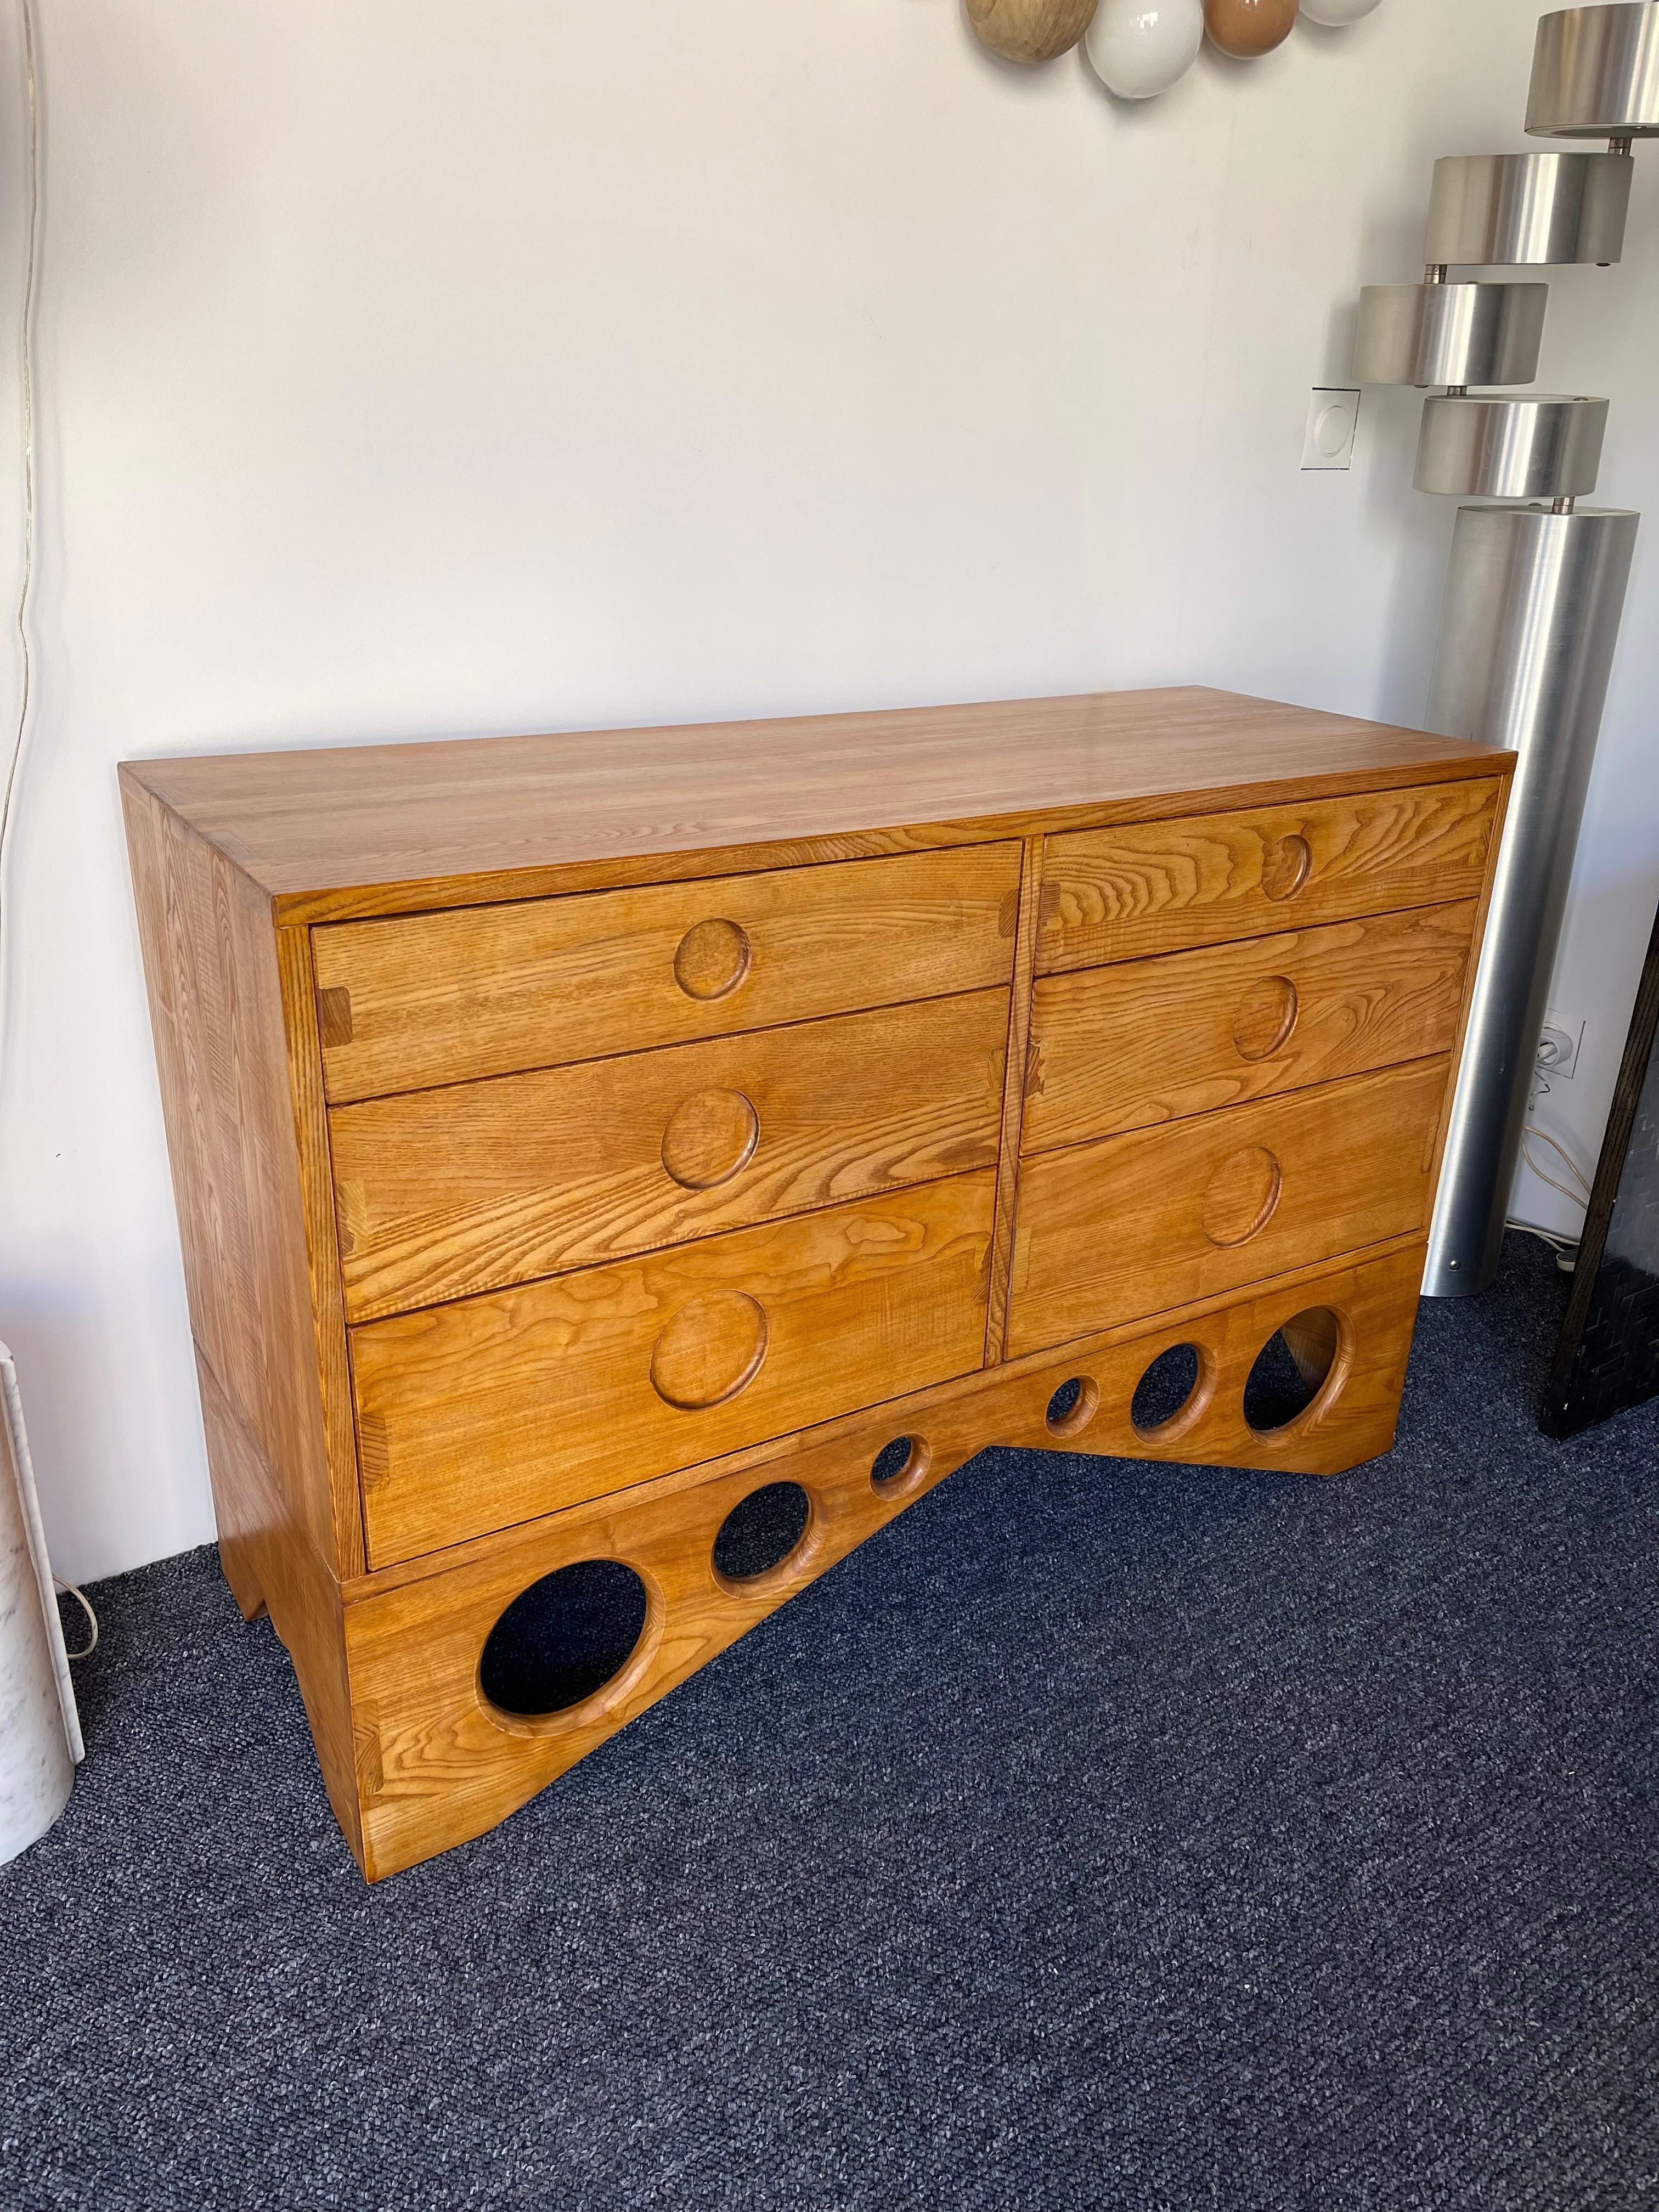 Massive wood chest of drawers or commode circle decor, italian design nice wood assembly construction. In the mood of Mid-Century Modern, scandinavian, contemporary design.